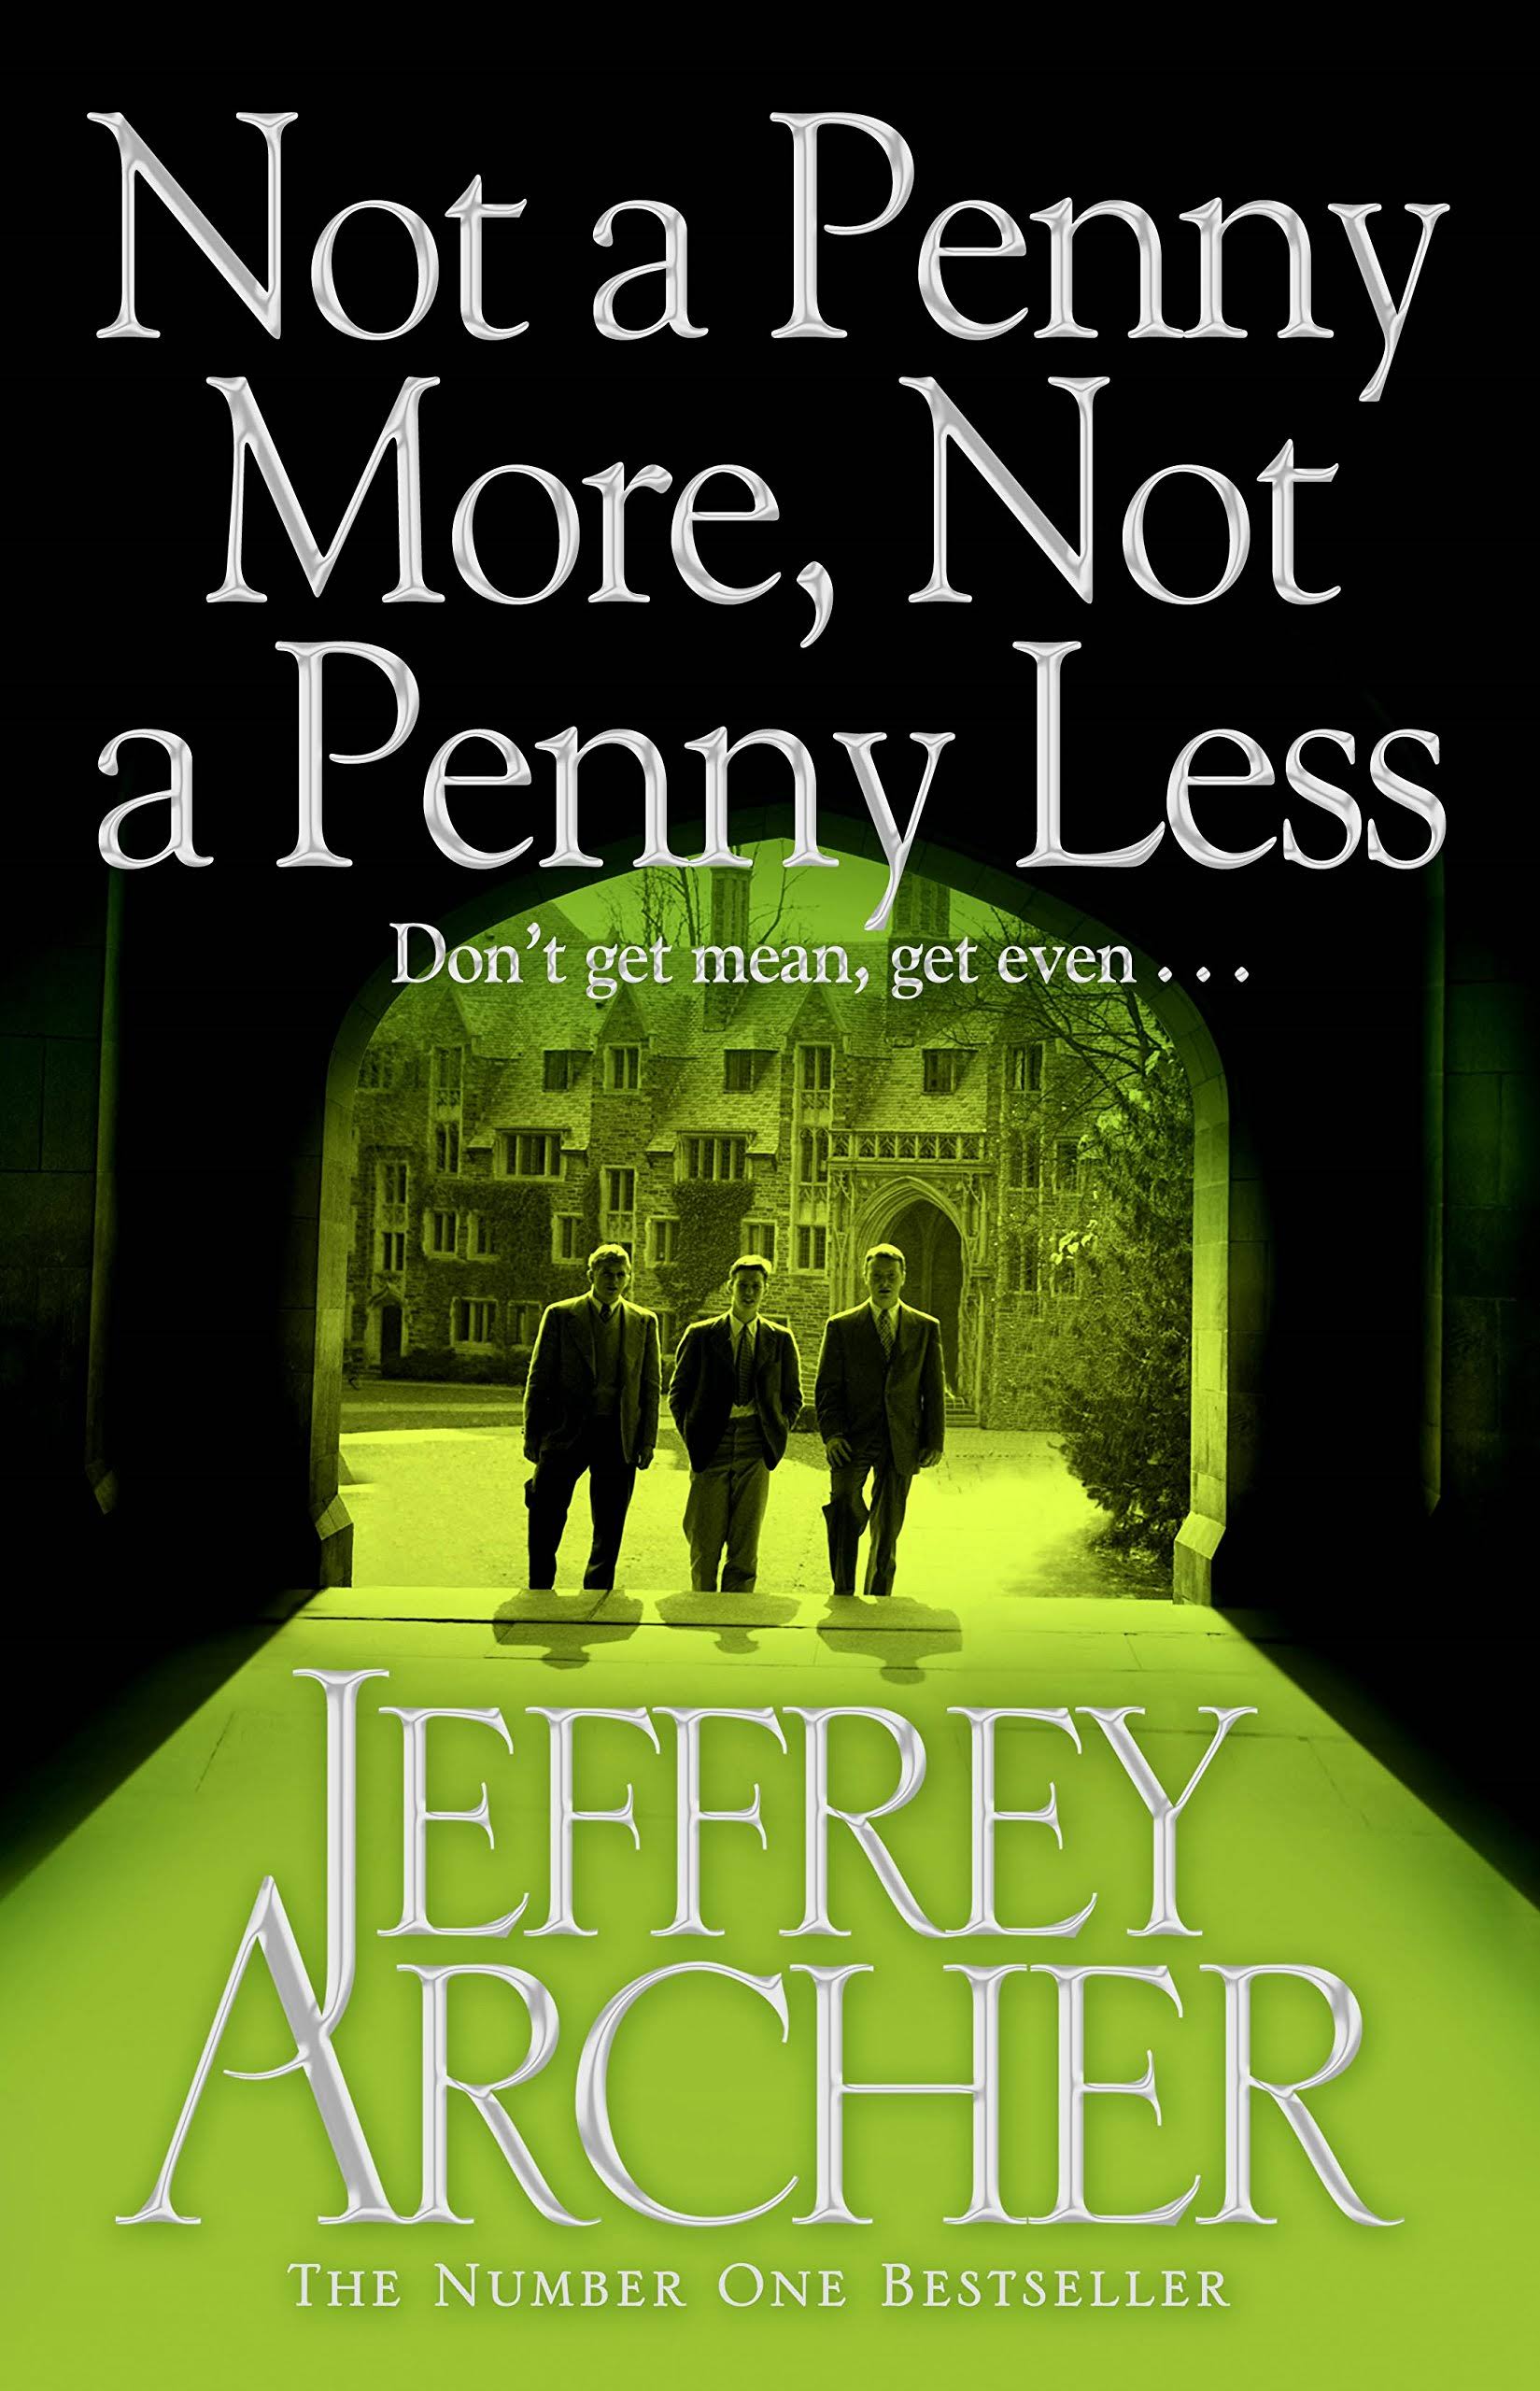 Not a Penny More, Not a Penny Less [Book]